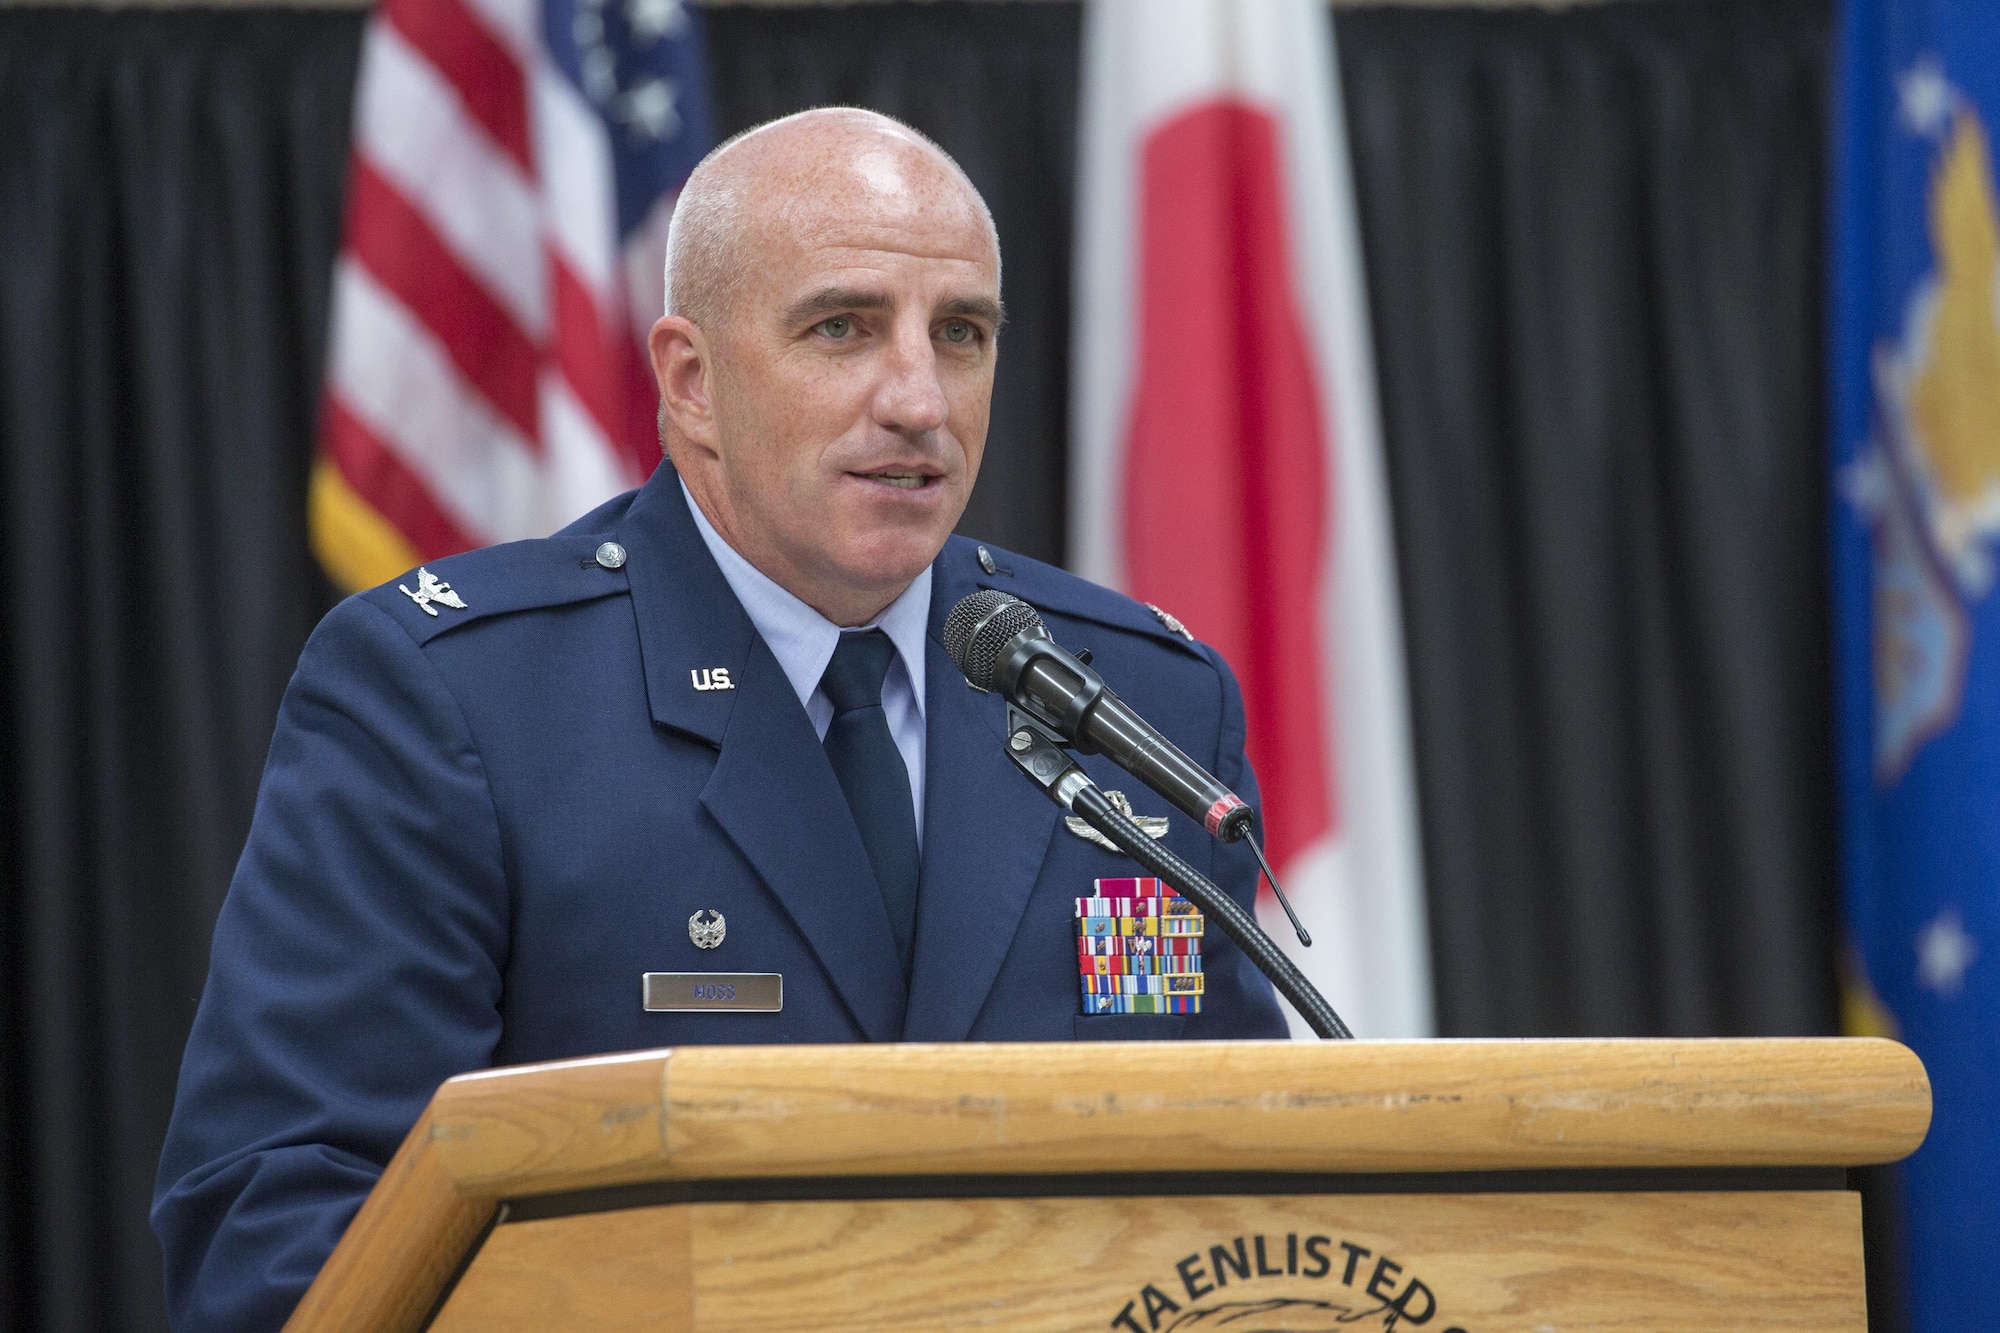 Col. Kenneth Moss, 374th Airlift Wing commander, gives remarks during the 374th Mission Support Group change of command ceremony at Yokota Air Base, Japan, Aug. 8, 2016. Moss spoke about the challenges the 374 MSG faced such as new facilities and natural disasters and mentioned the awards the group won for its efforts. (U.S. Air Force photo by Yasuo Osakabe/Released)